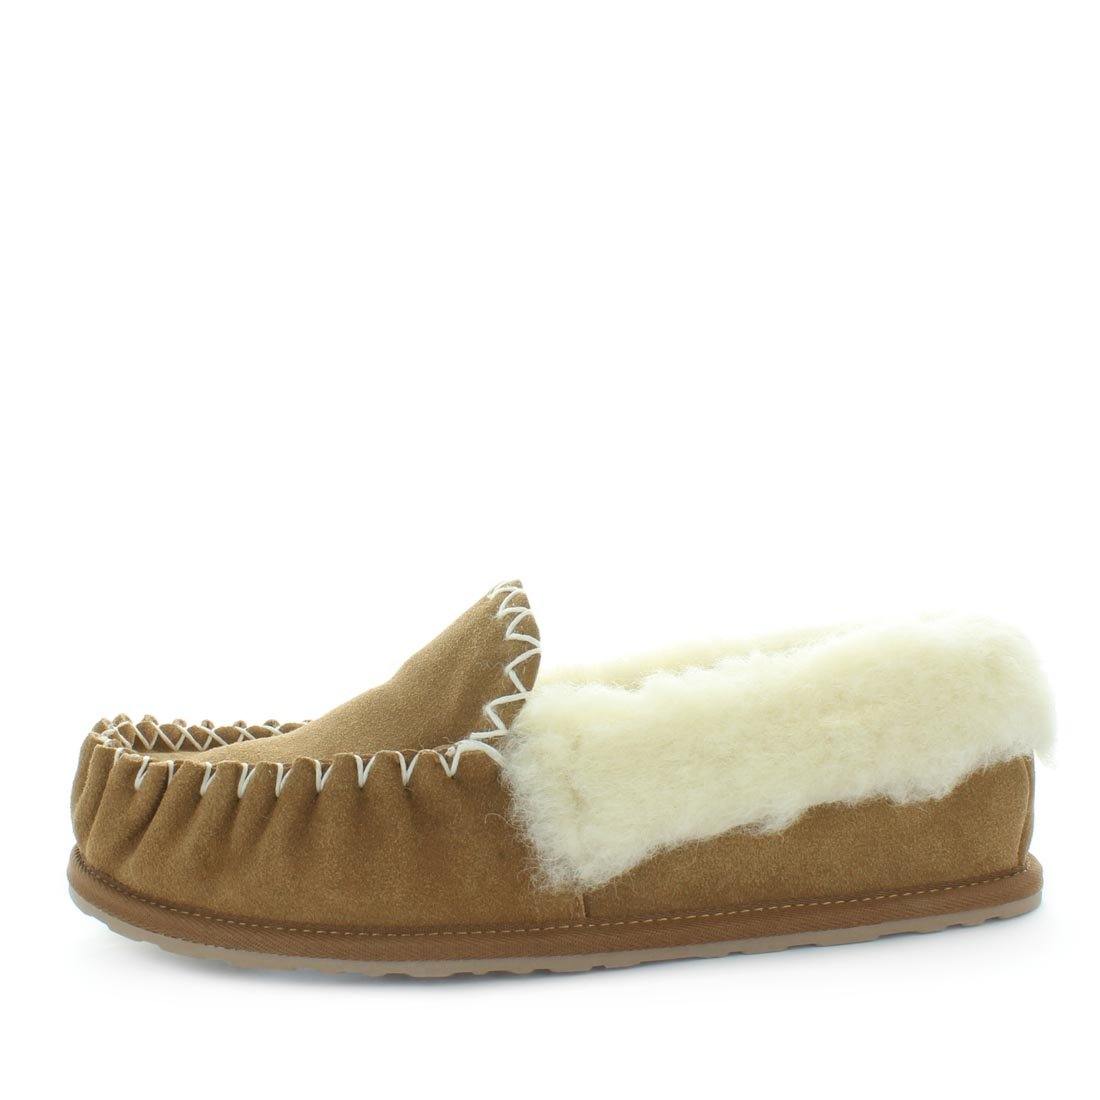 Load image into Gallery viewer, Mens slipper chums by just bee uggs, uggs boots - just bee slippers - mens slippers, moccasin slippers, wool slippers, 100% wool slippers.
